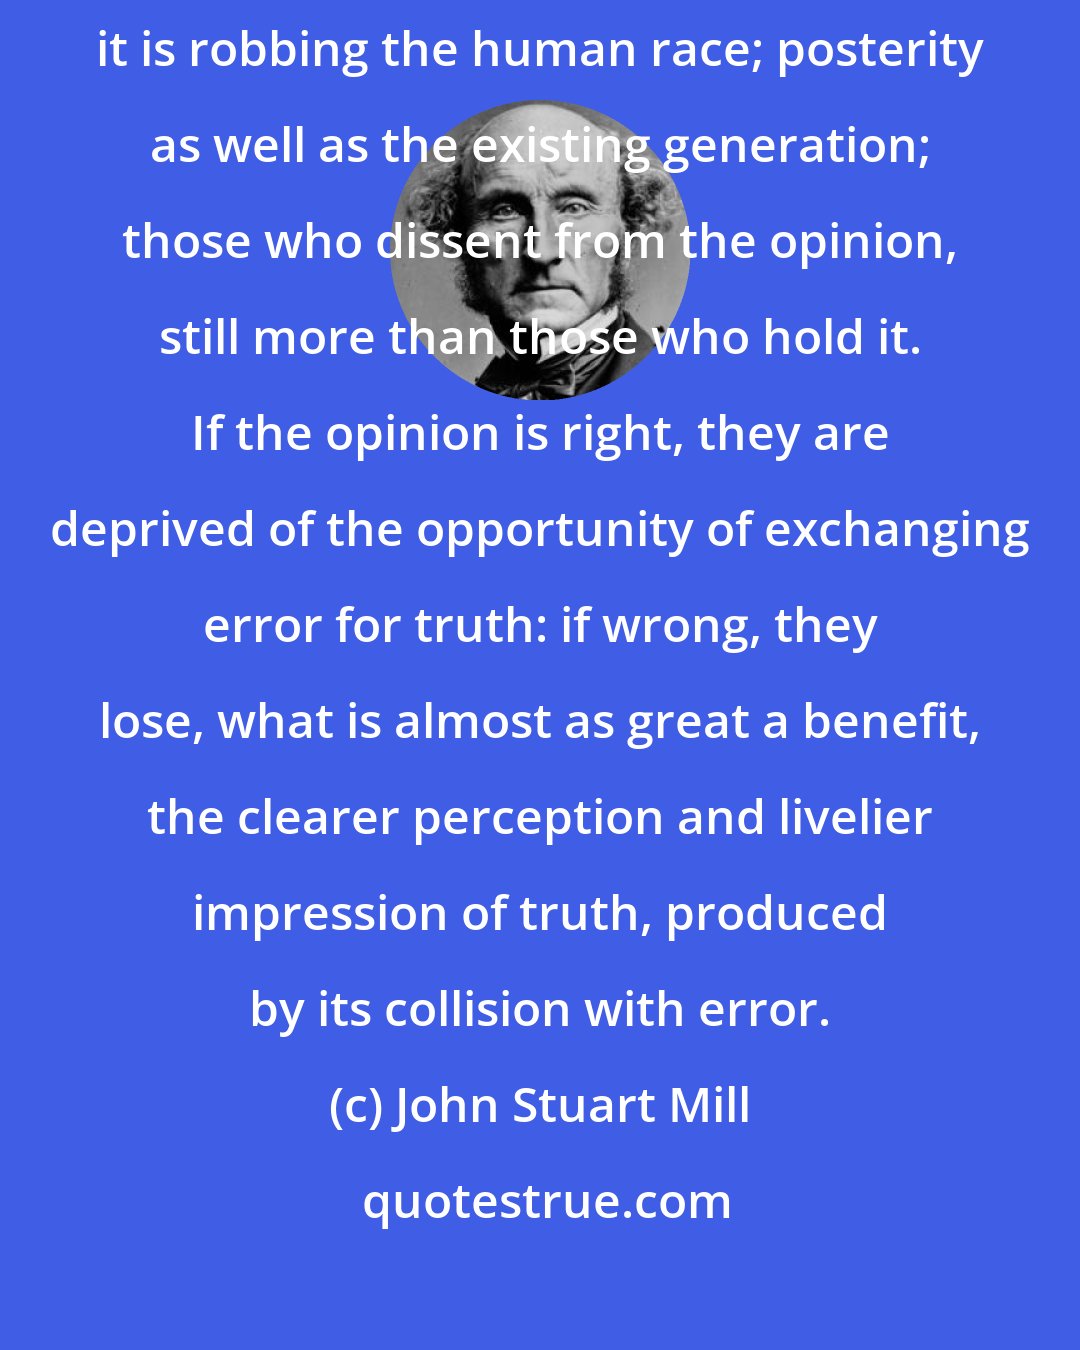 John Stuart Mill: The peculiar evil of silencing the expression of an opinion is, that it is robbing the human race; posterity as well as the existing generation; those who dissent from the opinion, still more than those who hold it. If the opinion is right, they are deprived of the opportunity of exchanging error for truth: if wrong, they lose, what is almost as great a benefit, the clearer perception and livelier impression of truth, produced by its collision with error.